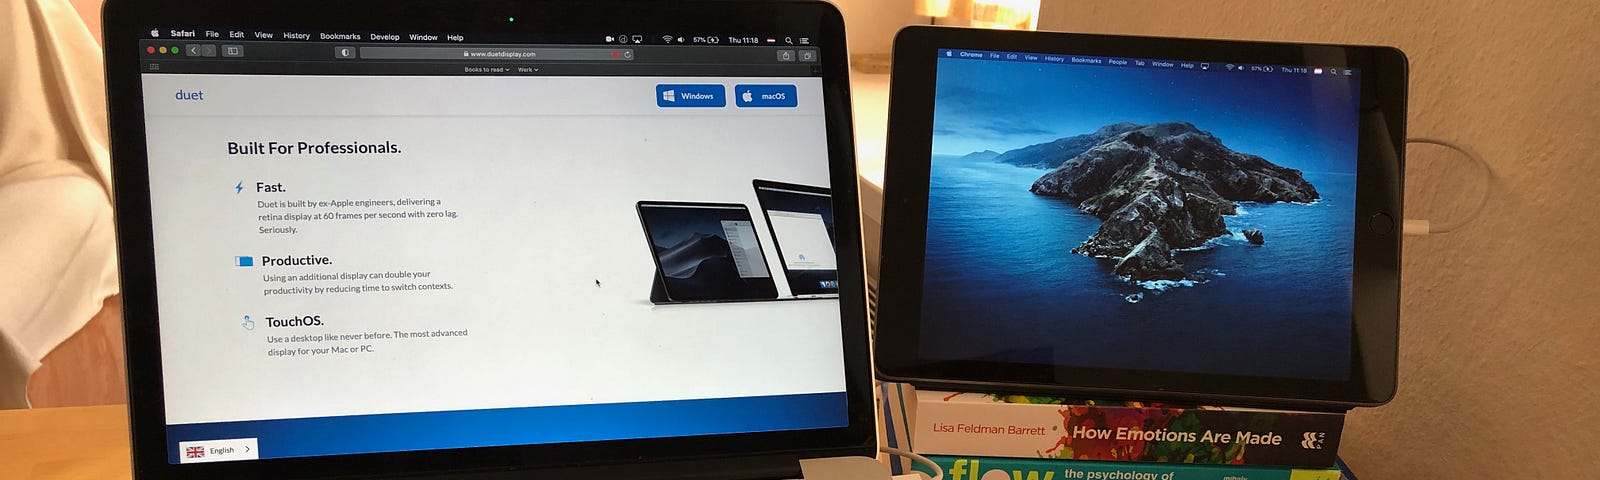 Dual monitor setup with laptop and iPad placed on a pile of 4 books, connected via Duet Display app.